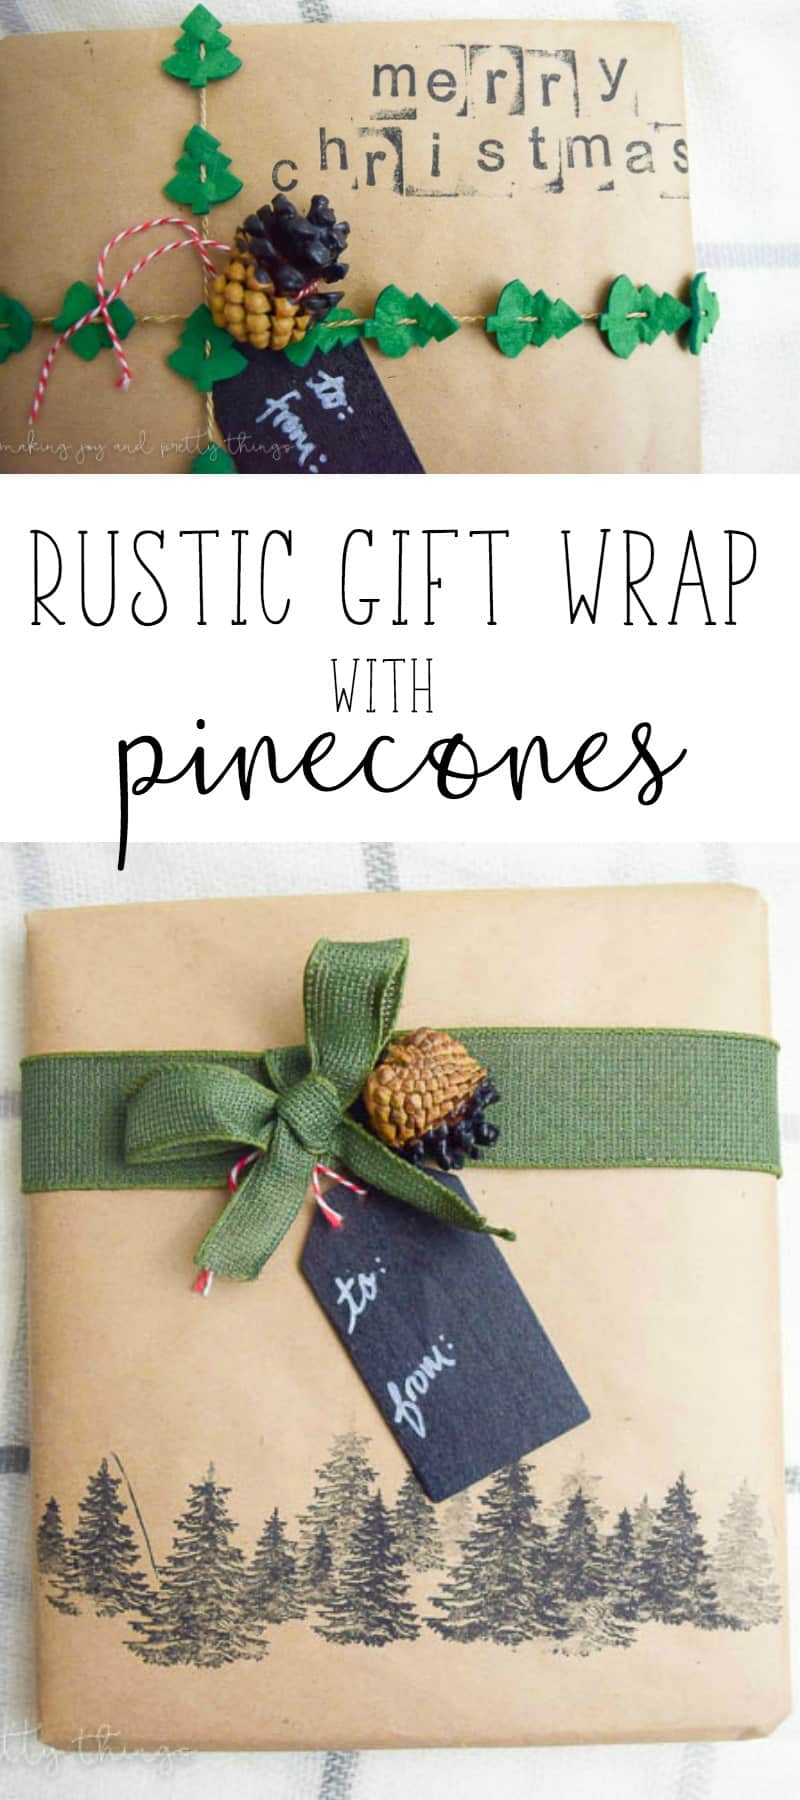 Check out these rustic gift wrap ideas for Christmas gifts! Use pinecones, felt Christmas tree cutouts, twine, and stamps to create this gift wrapping ideas.